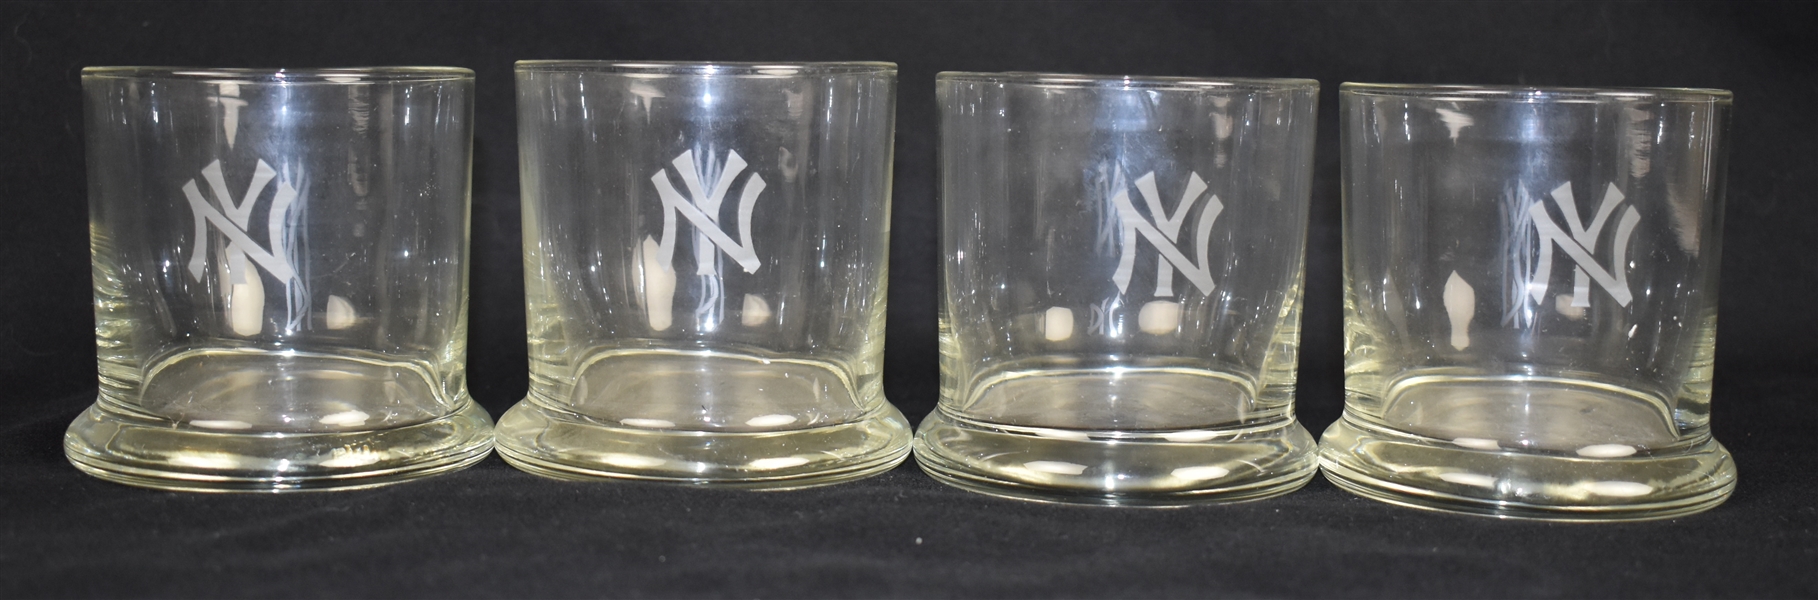 Set of Four (4) New York Yankee Cocktail Glasses